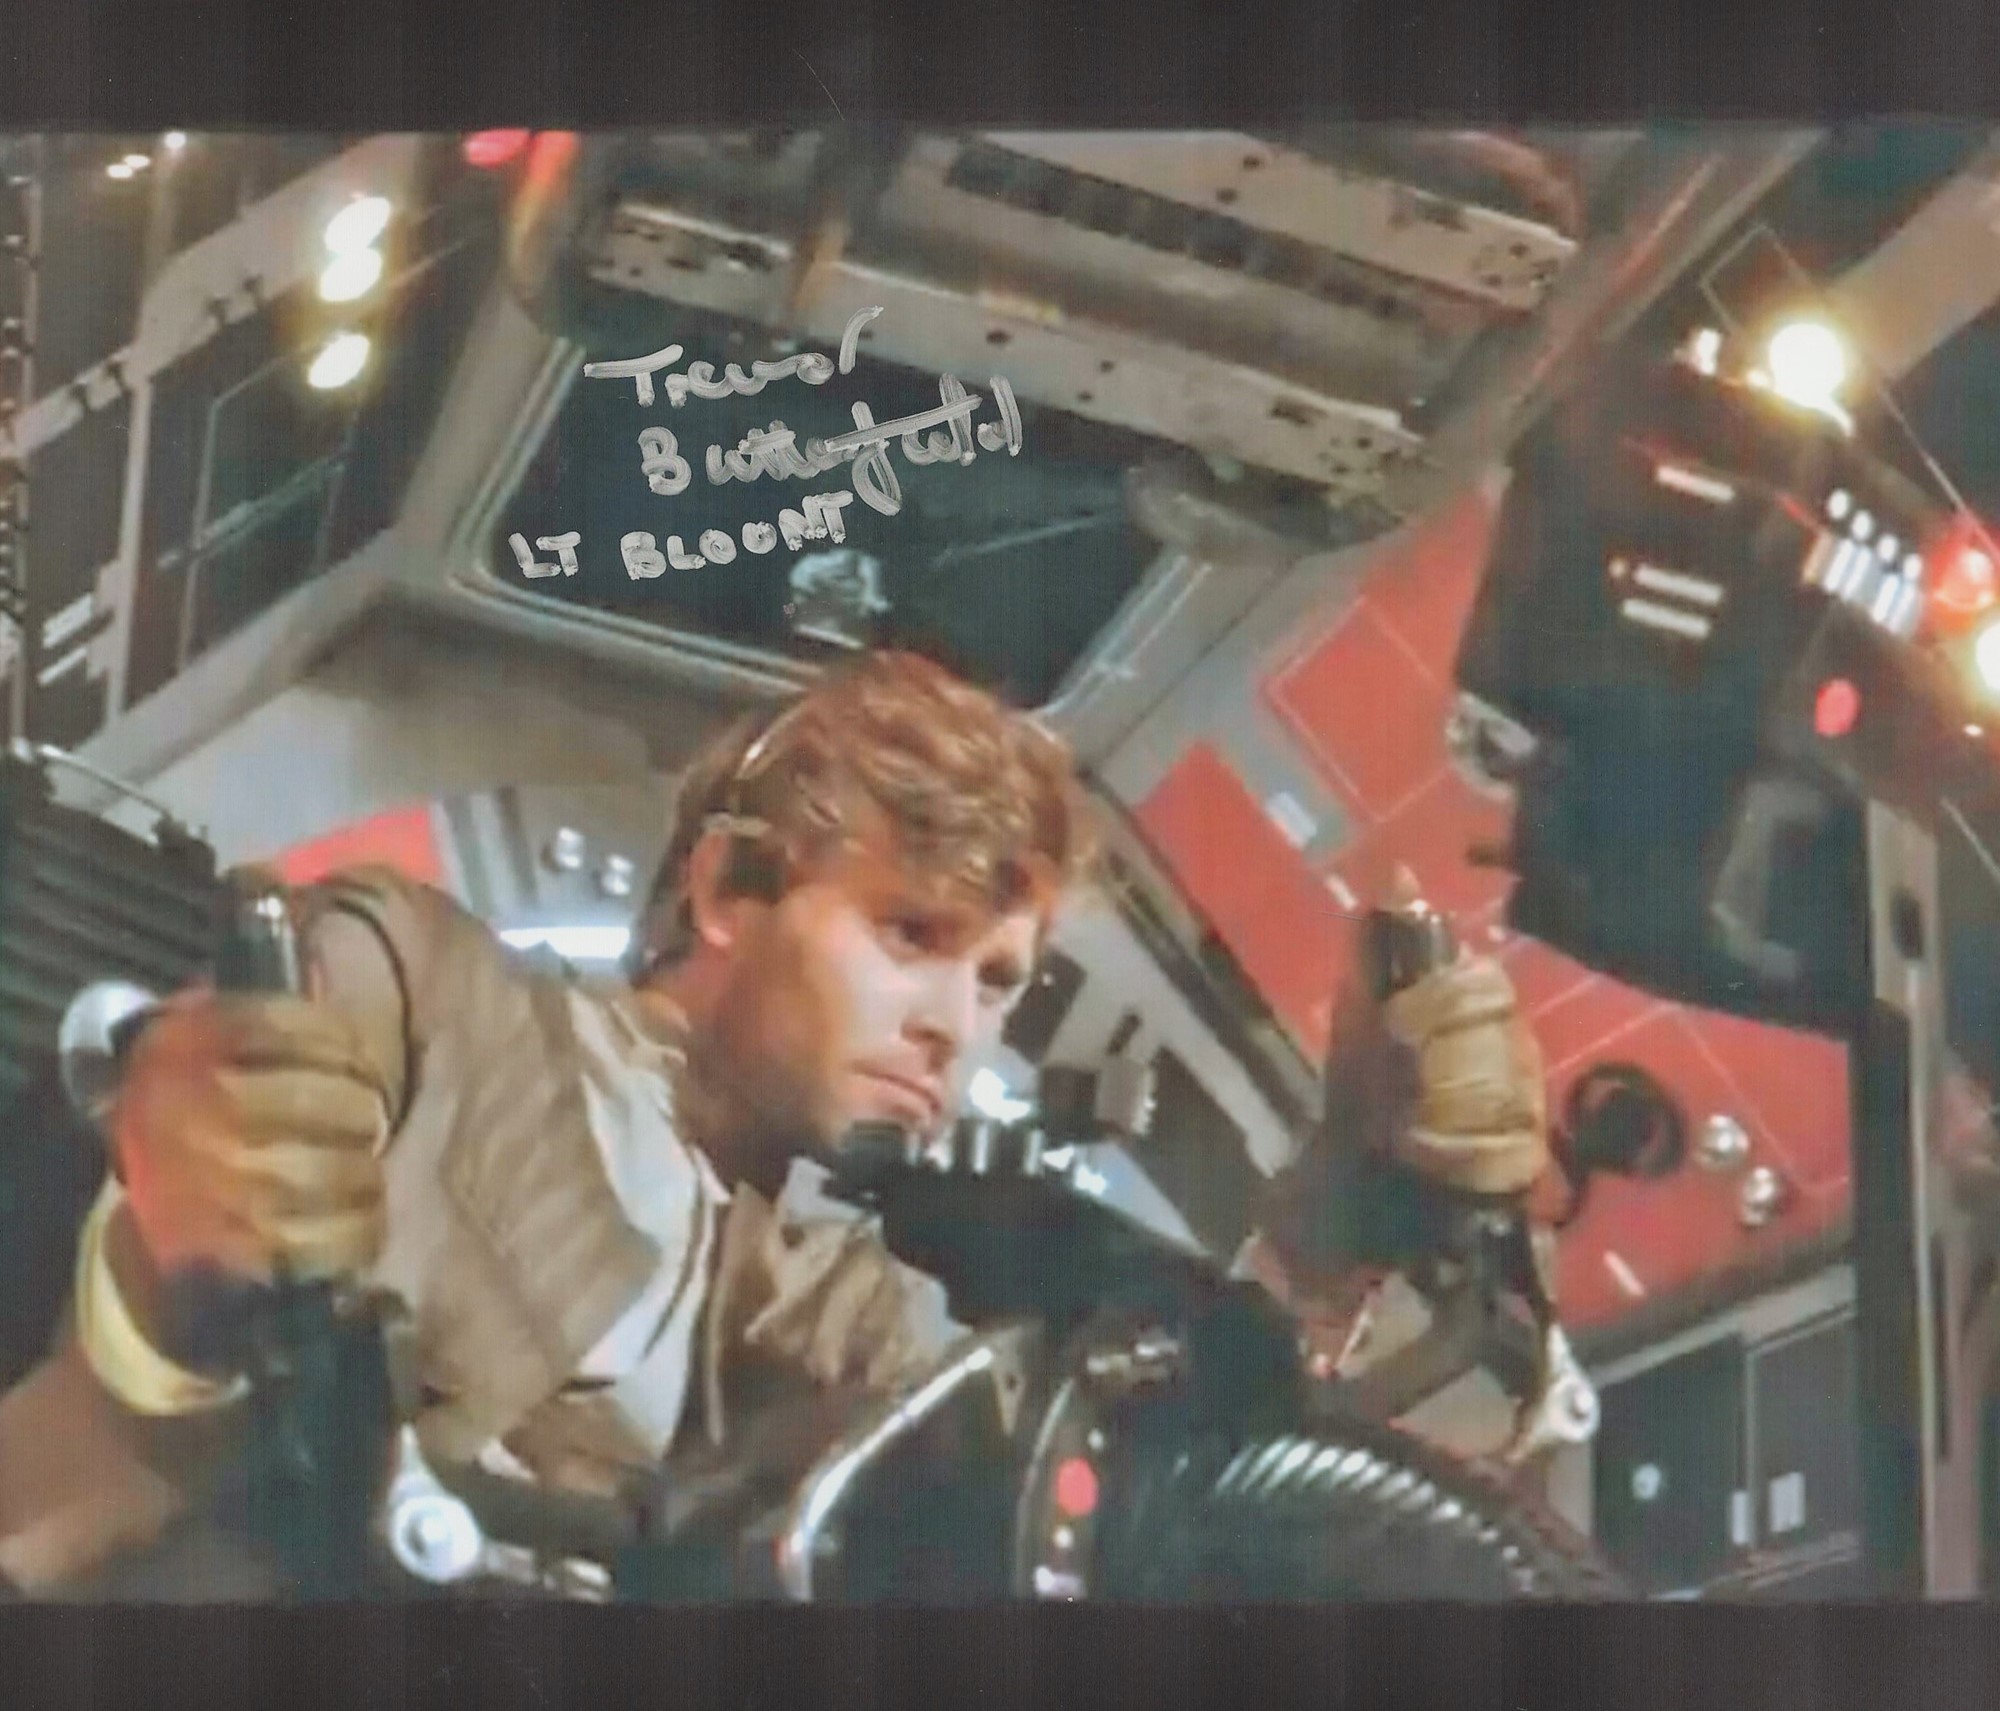 Star Wars Actor, Trevor Butterfield signed 10x8 colour photograph. Butterfield is a British actor